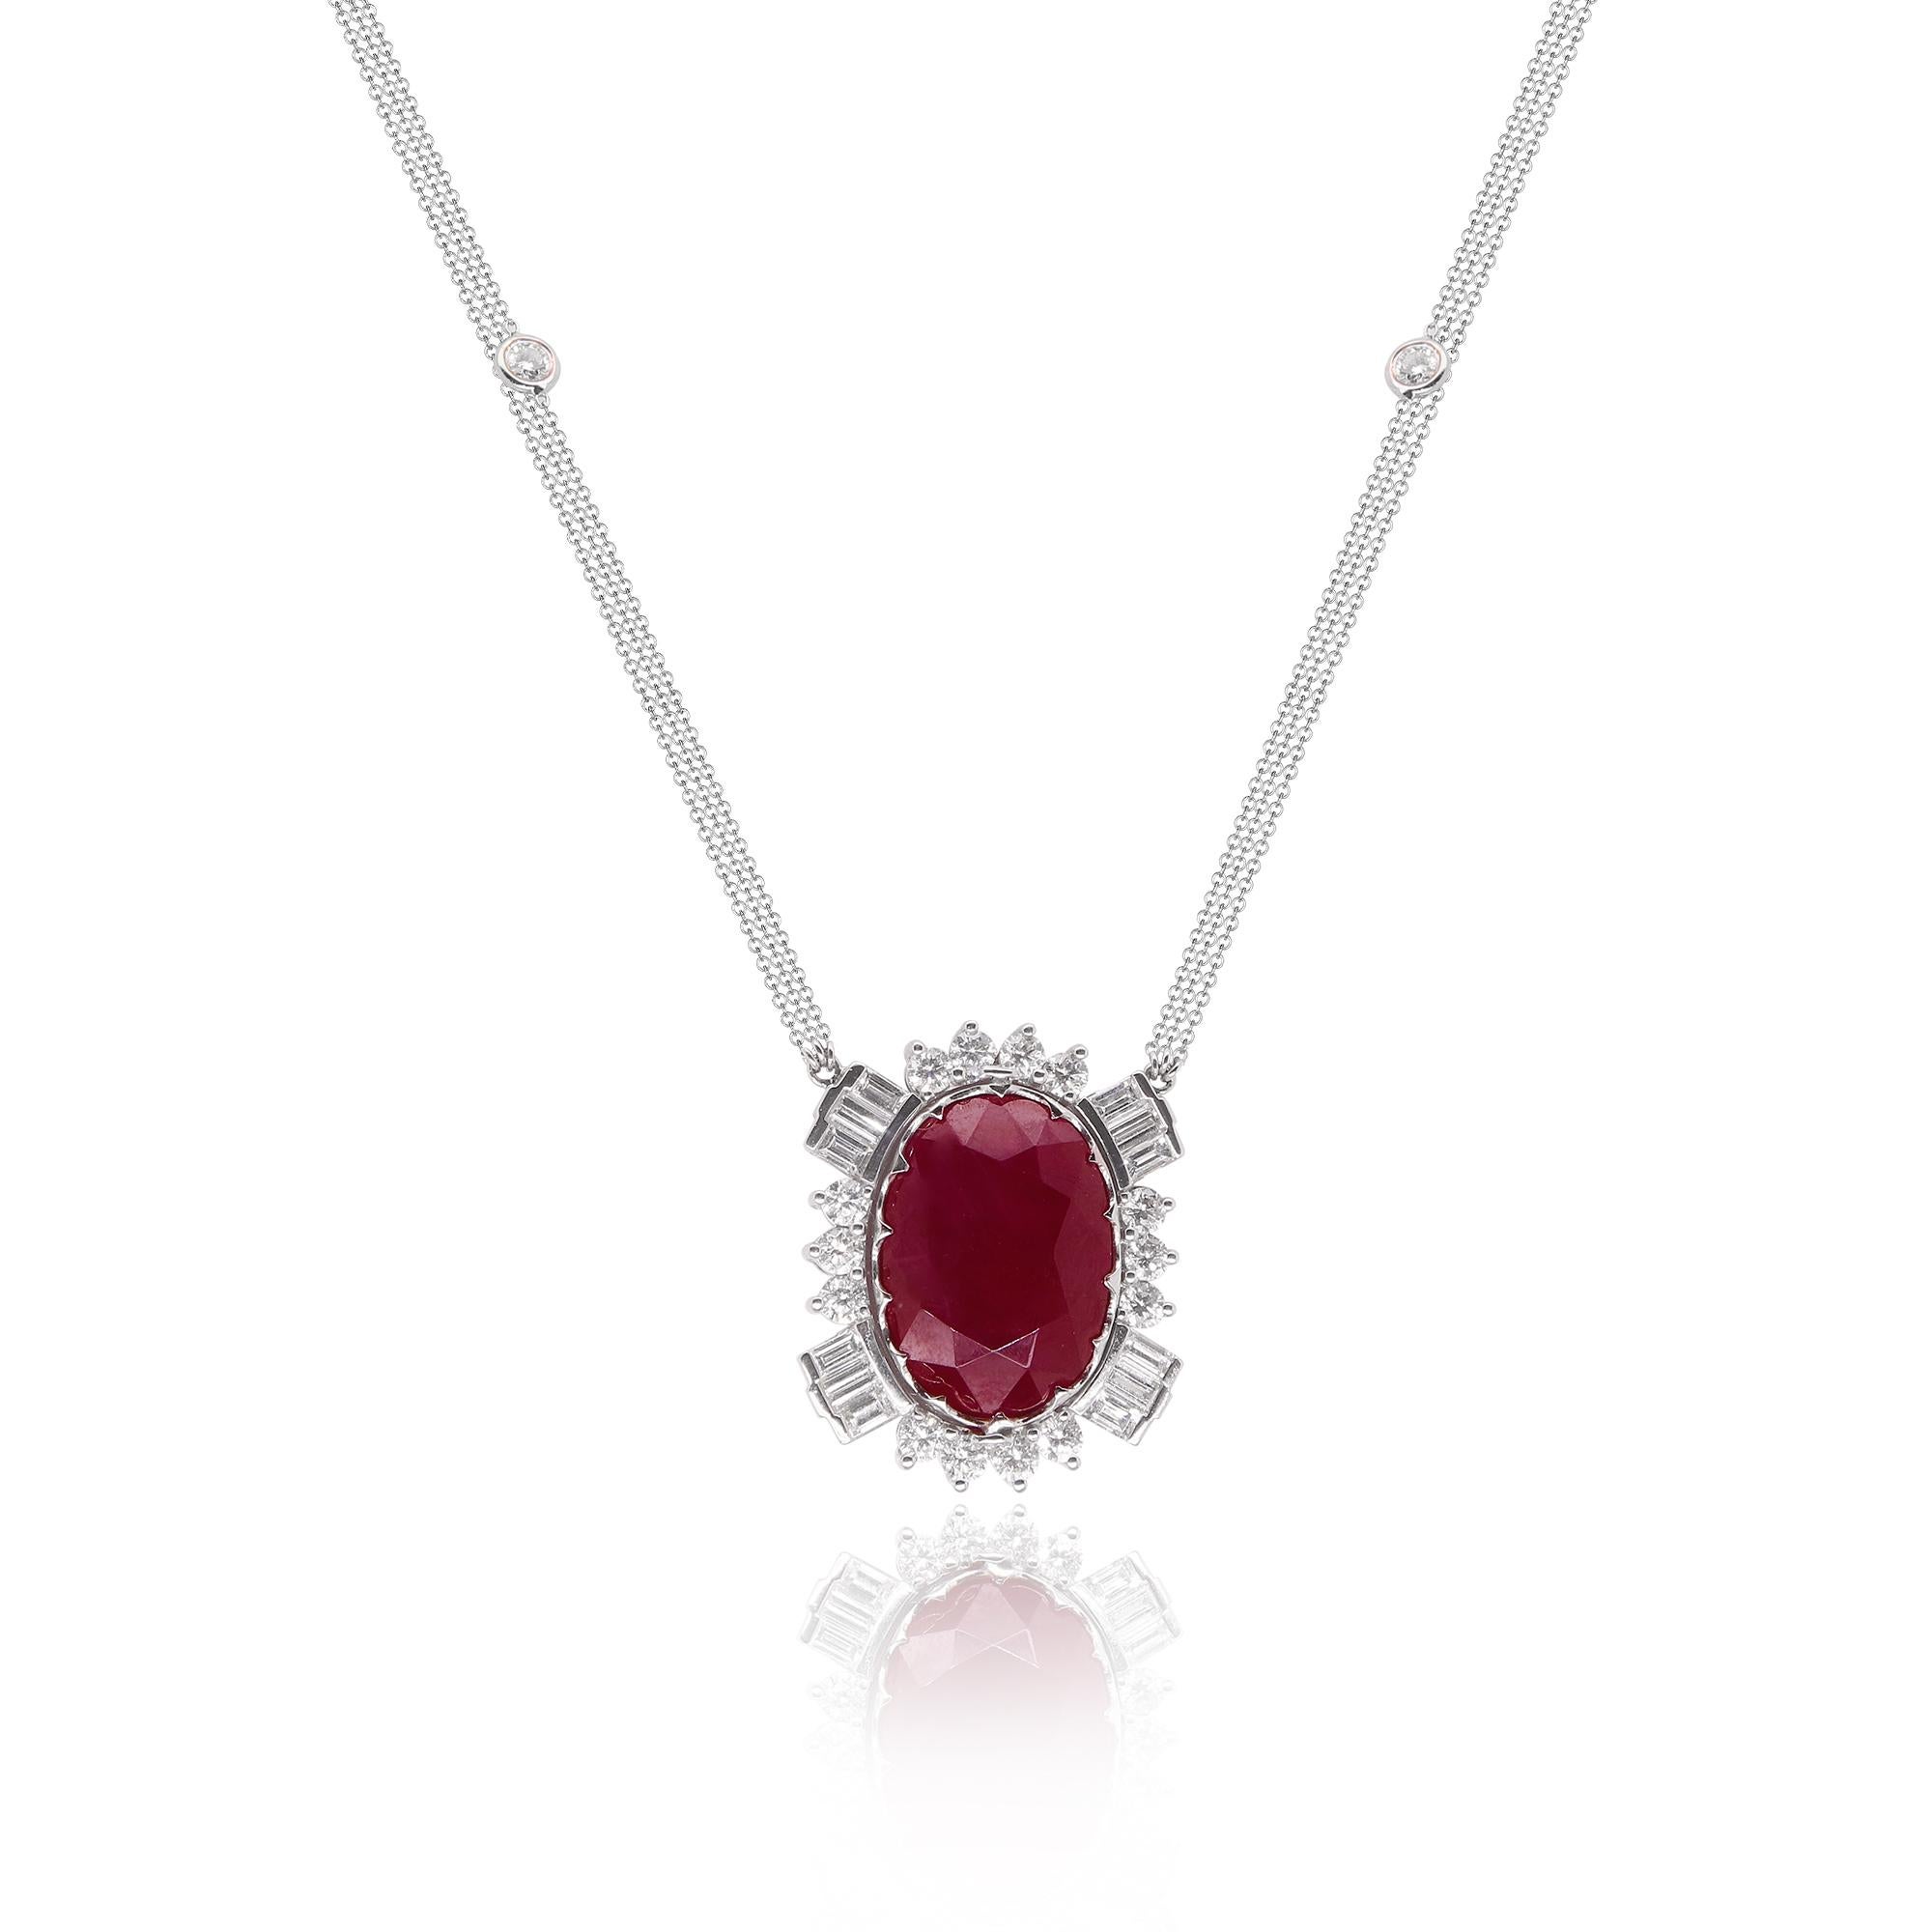 Material: 18K White Gold 
Center Stone Details: 1 Oval Shaped Ruby at 22.04 Carats - Measuring 19.88 x 14.25  7.82
Diamond Details: 12 Baguette White Diamonds at 1.4 Carats - Clarity: VS-SI / Color: G-H
Diamond Details: 20 Brilliant Round White